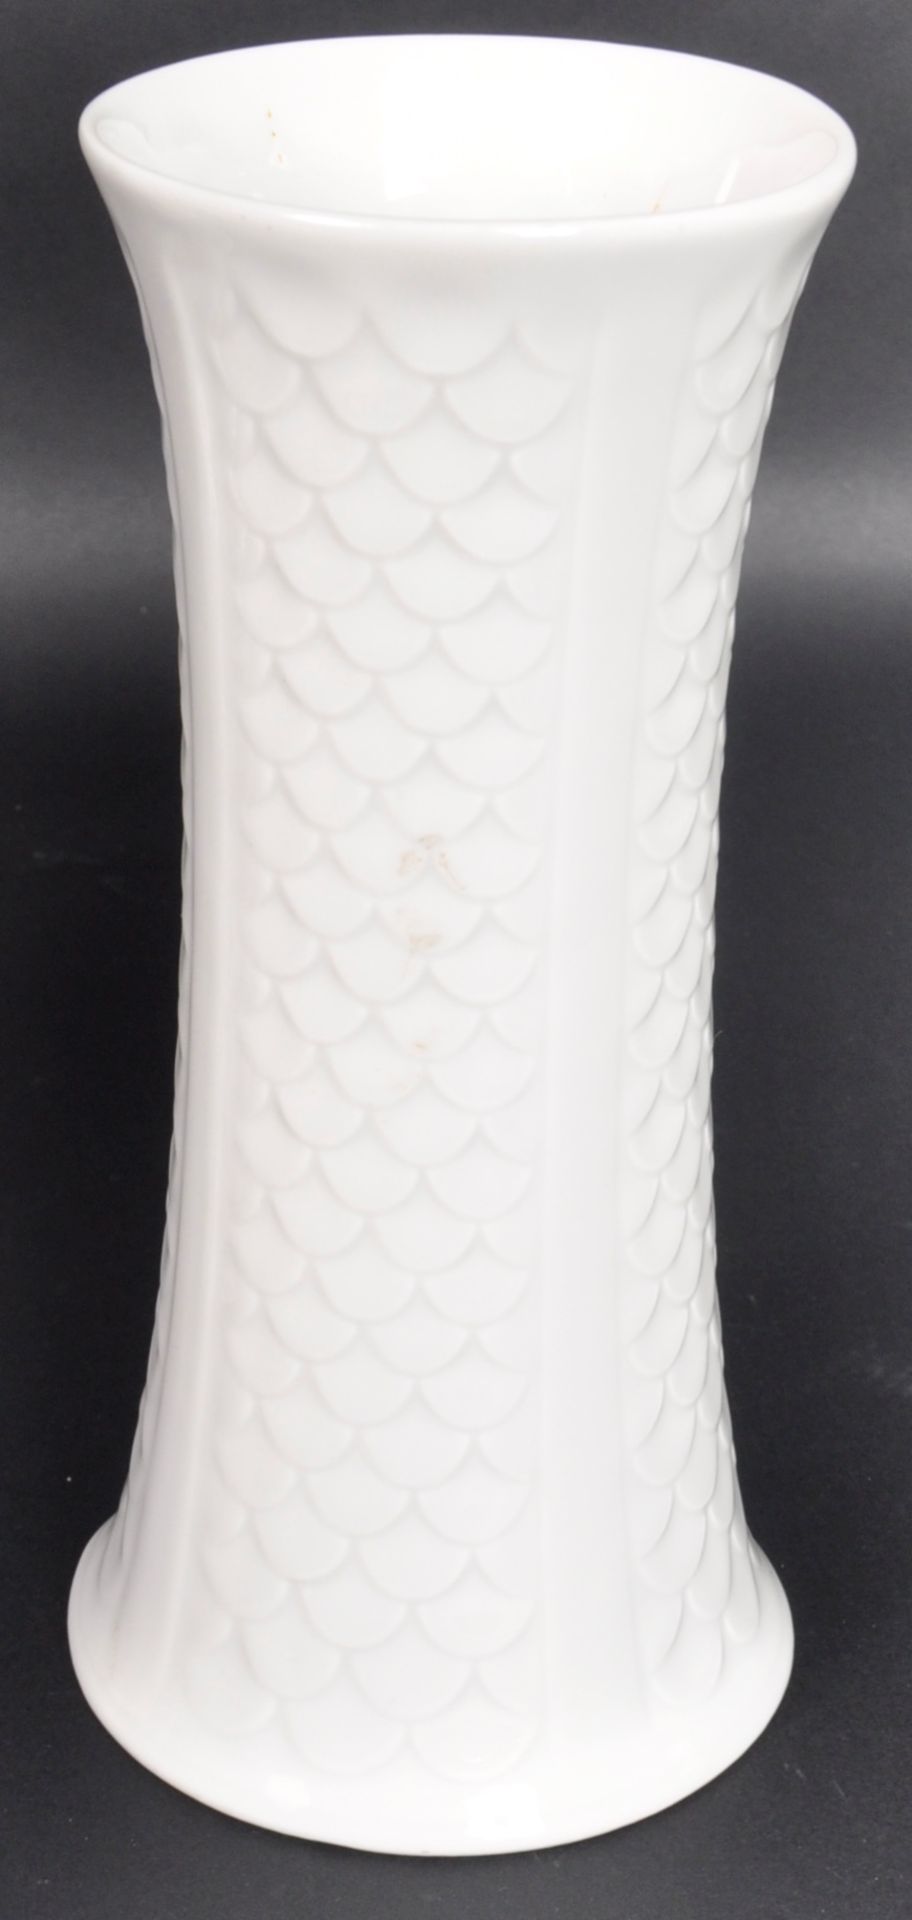 COLLECTION OF MID 20TH CENTURY GERMAN WHITE PORCELAIN VASES - Image 7 of 7